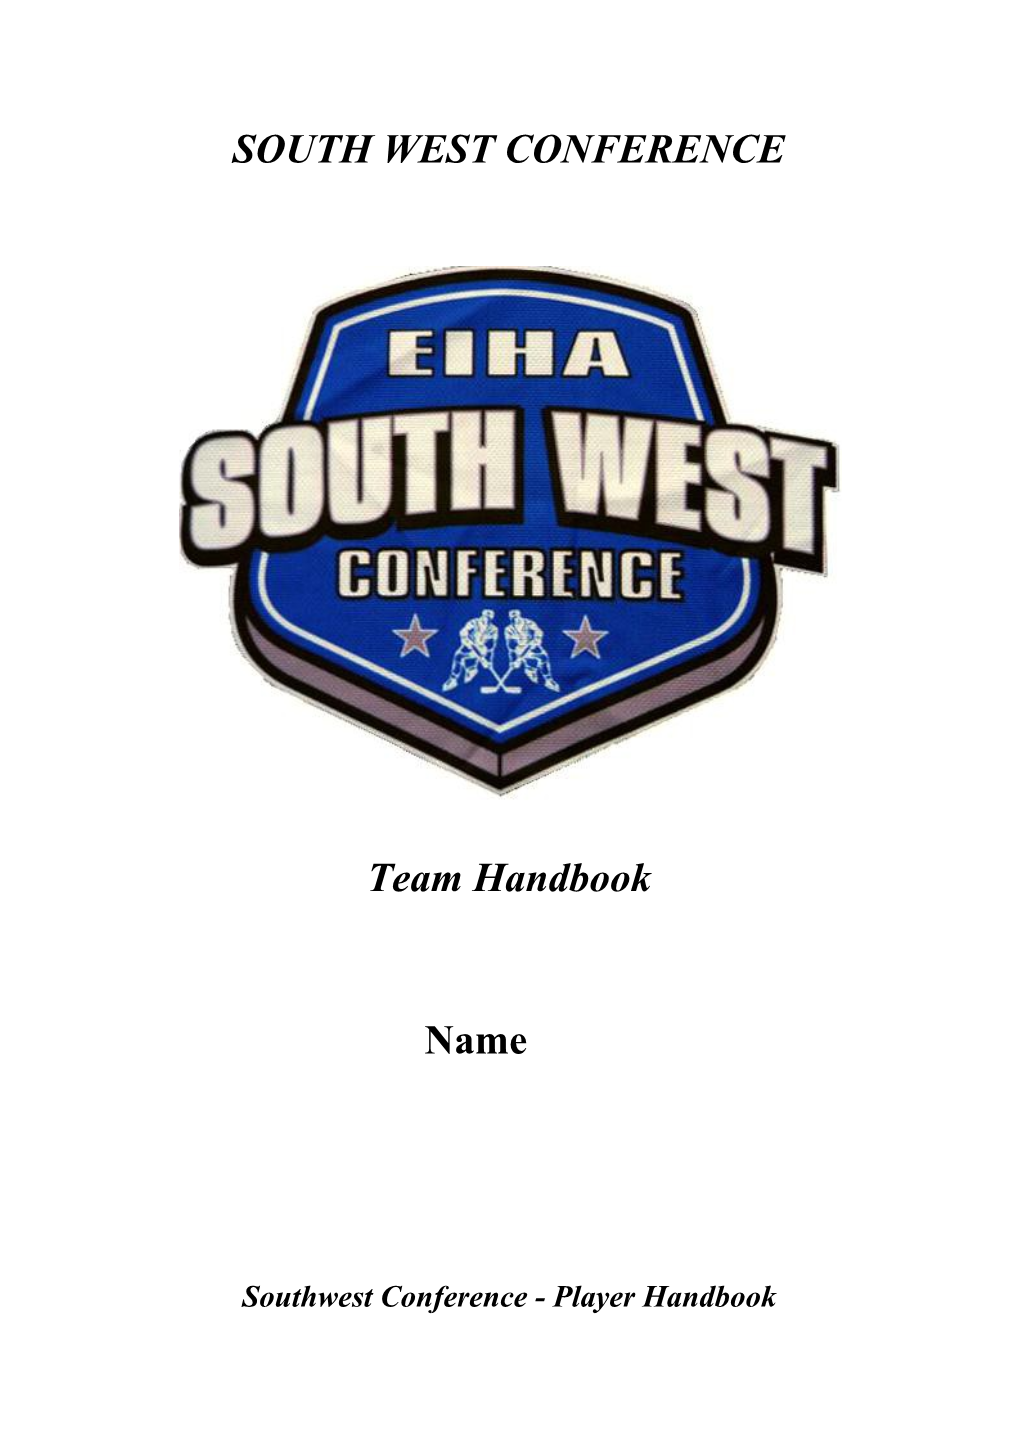 South West Conference